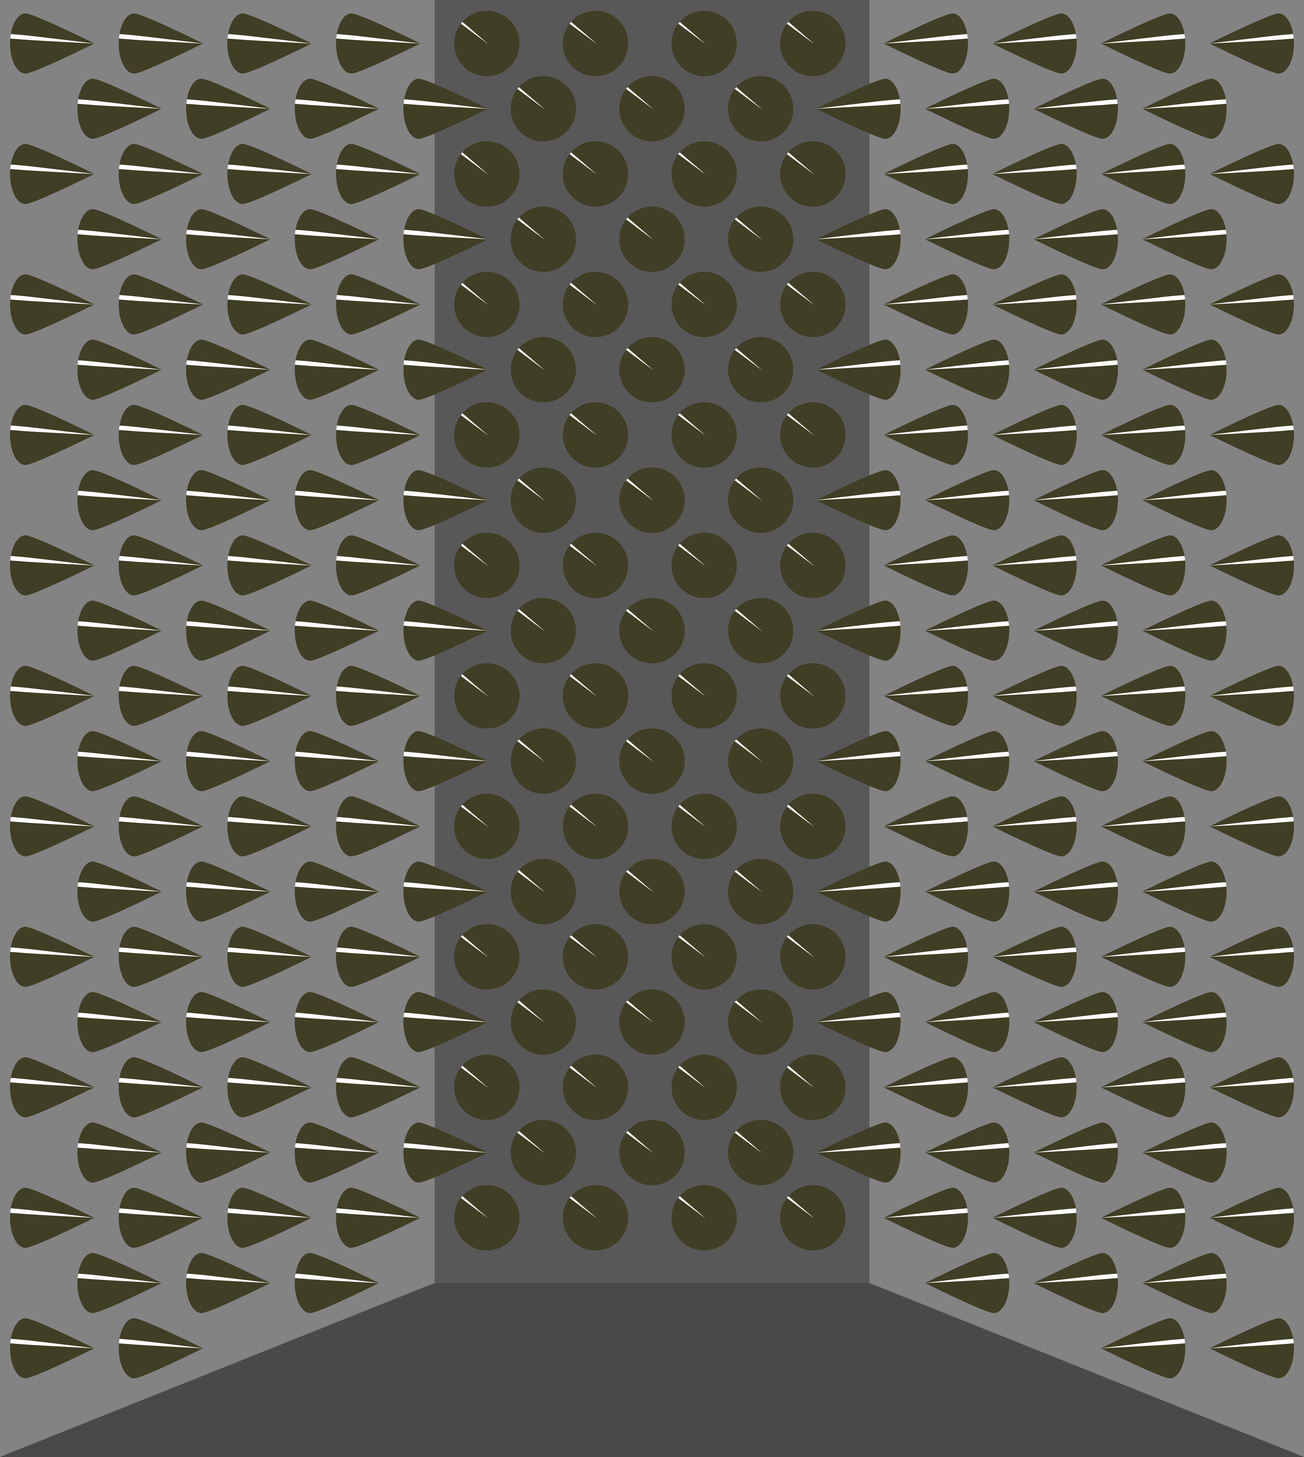 Gray walls with conical sharp spikes